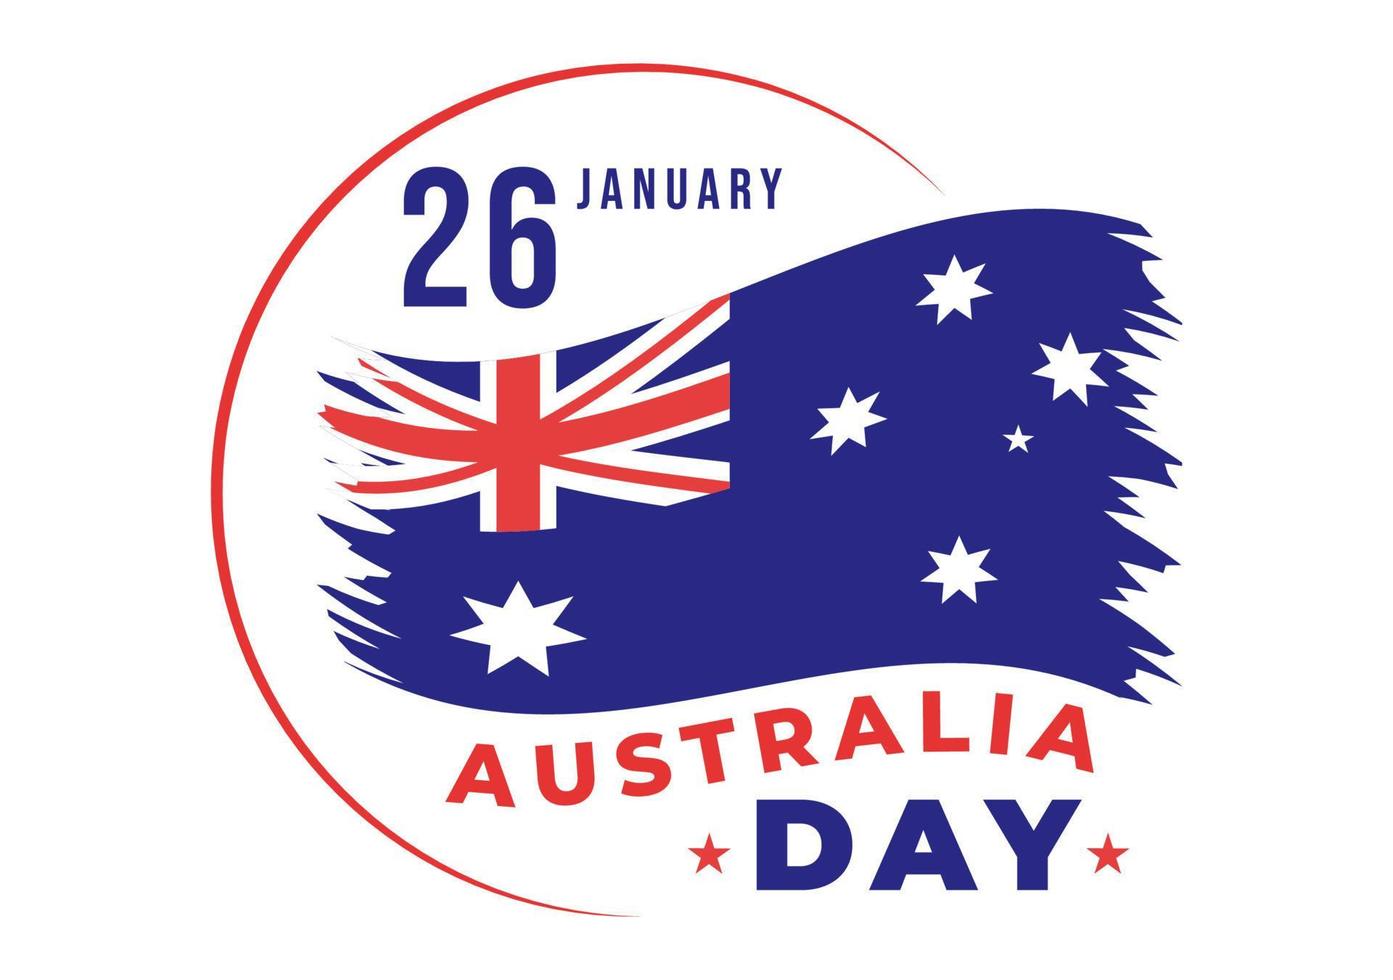 Happy Australia Day Observed Every Year on January 26th with Flags and Map to Diversity of Peoples in Flat Cartoon Hand Drawn Template Illustration vector